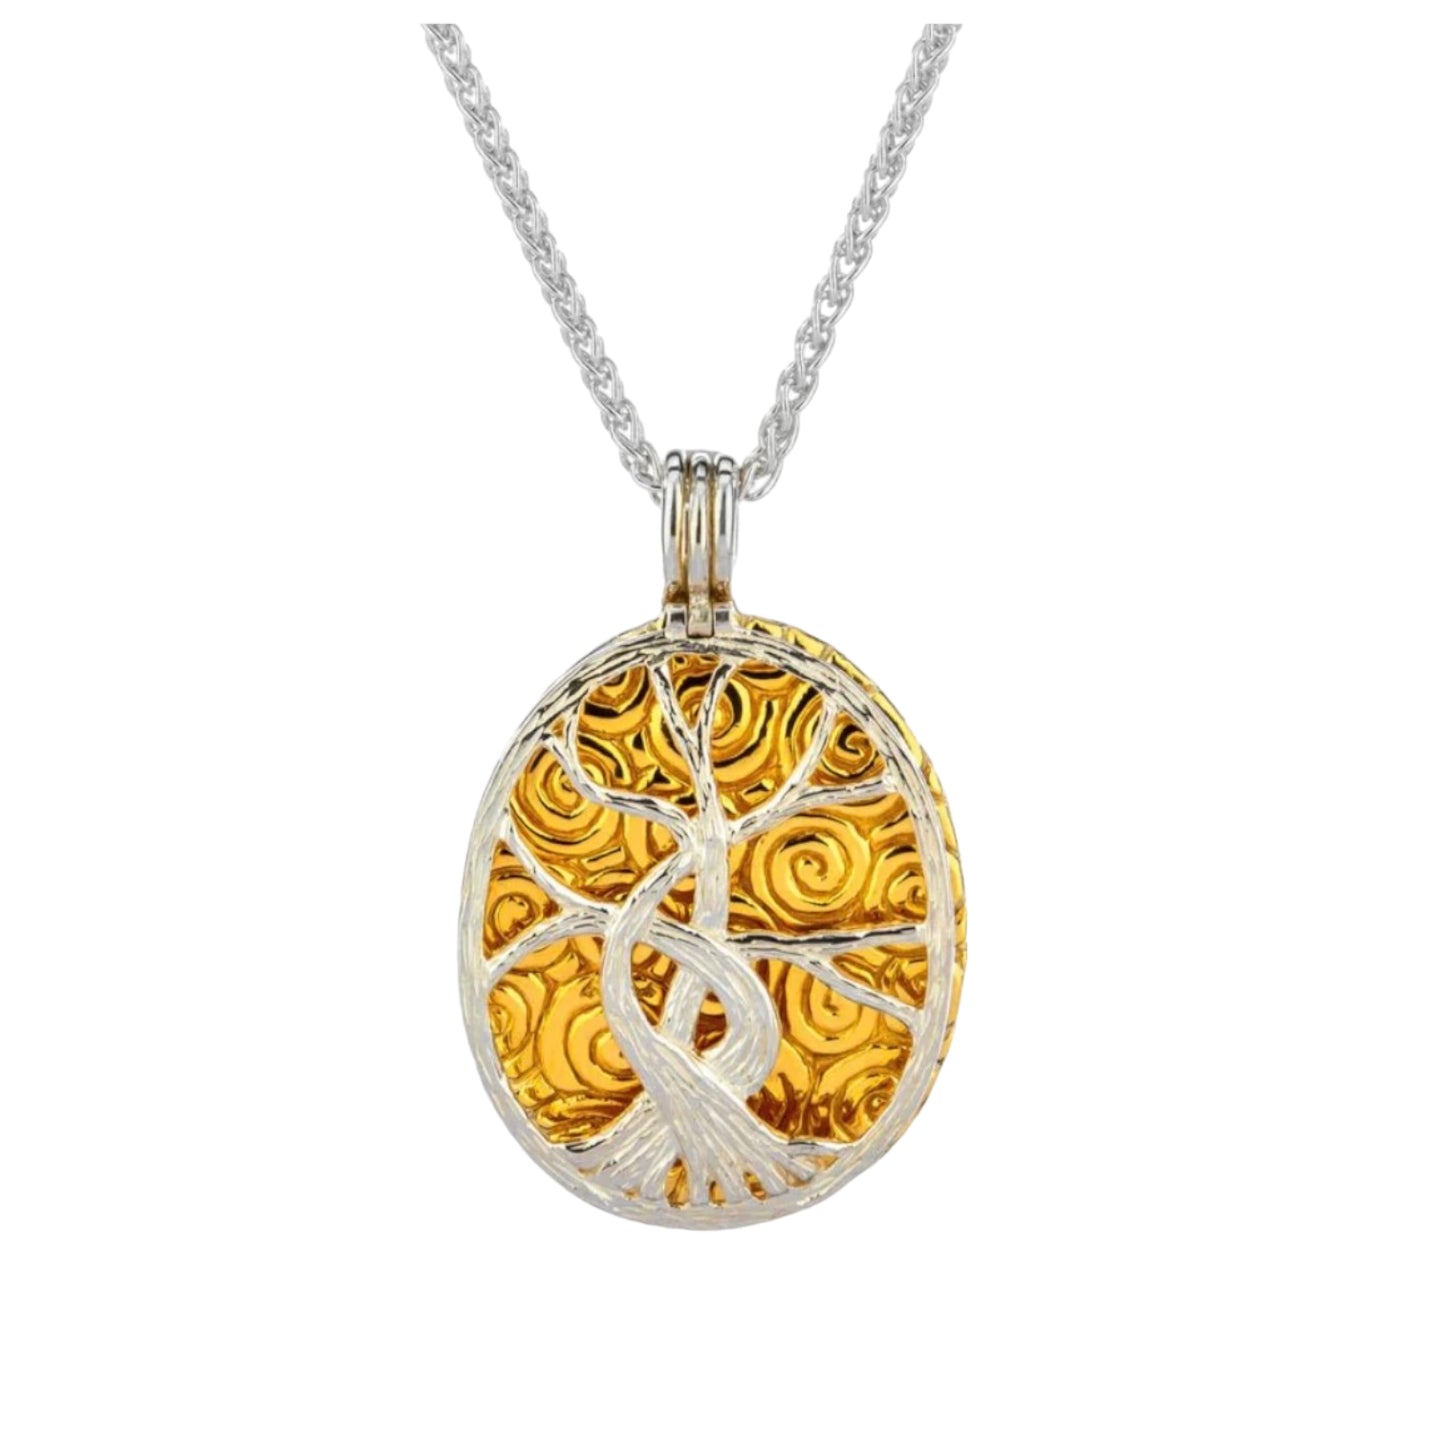 Keith Jack Silver with 22K Gold Gilding Tree of Life 4 Way Pendant